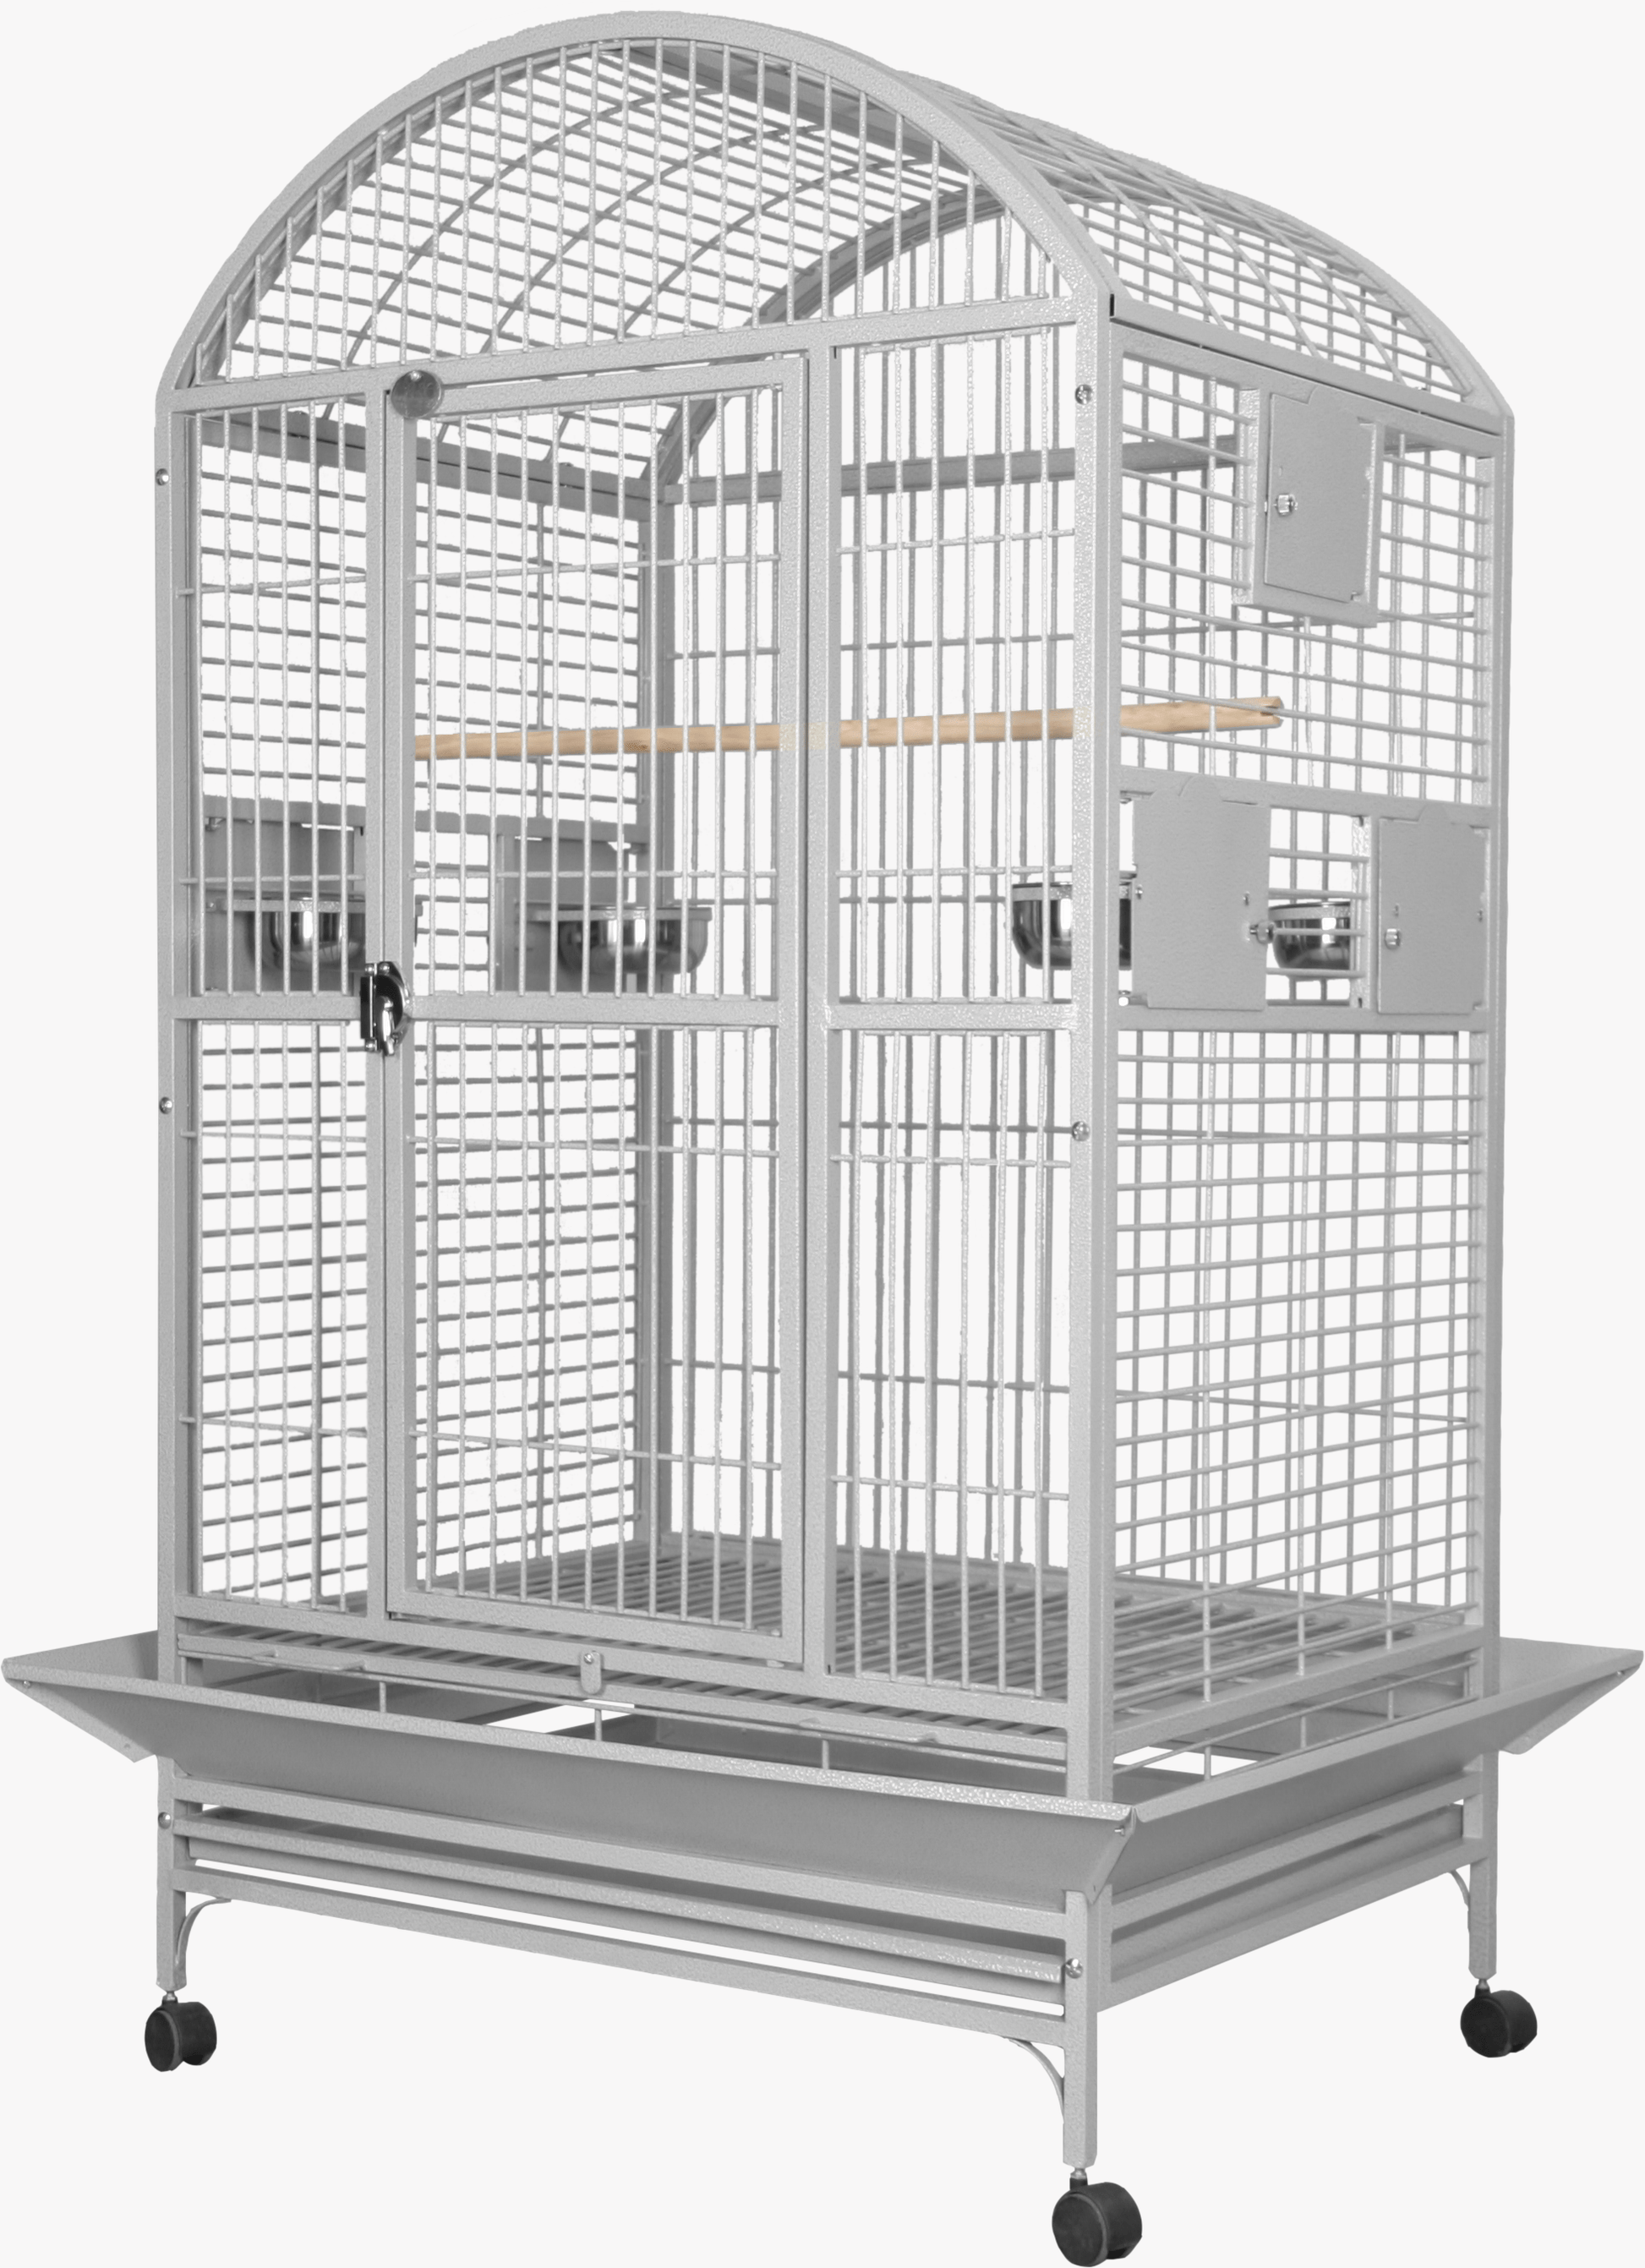 A & E Cages Co Bird Cages & Stands White DomeTop Cage 36"x28"x65"